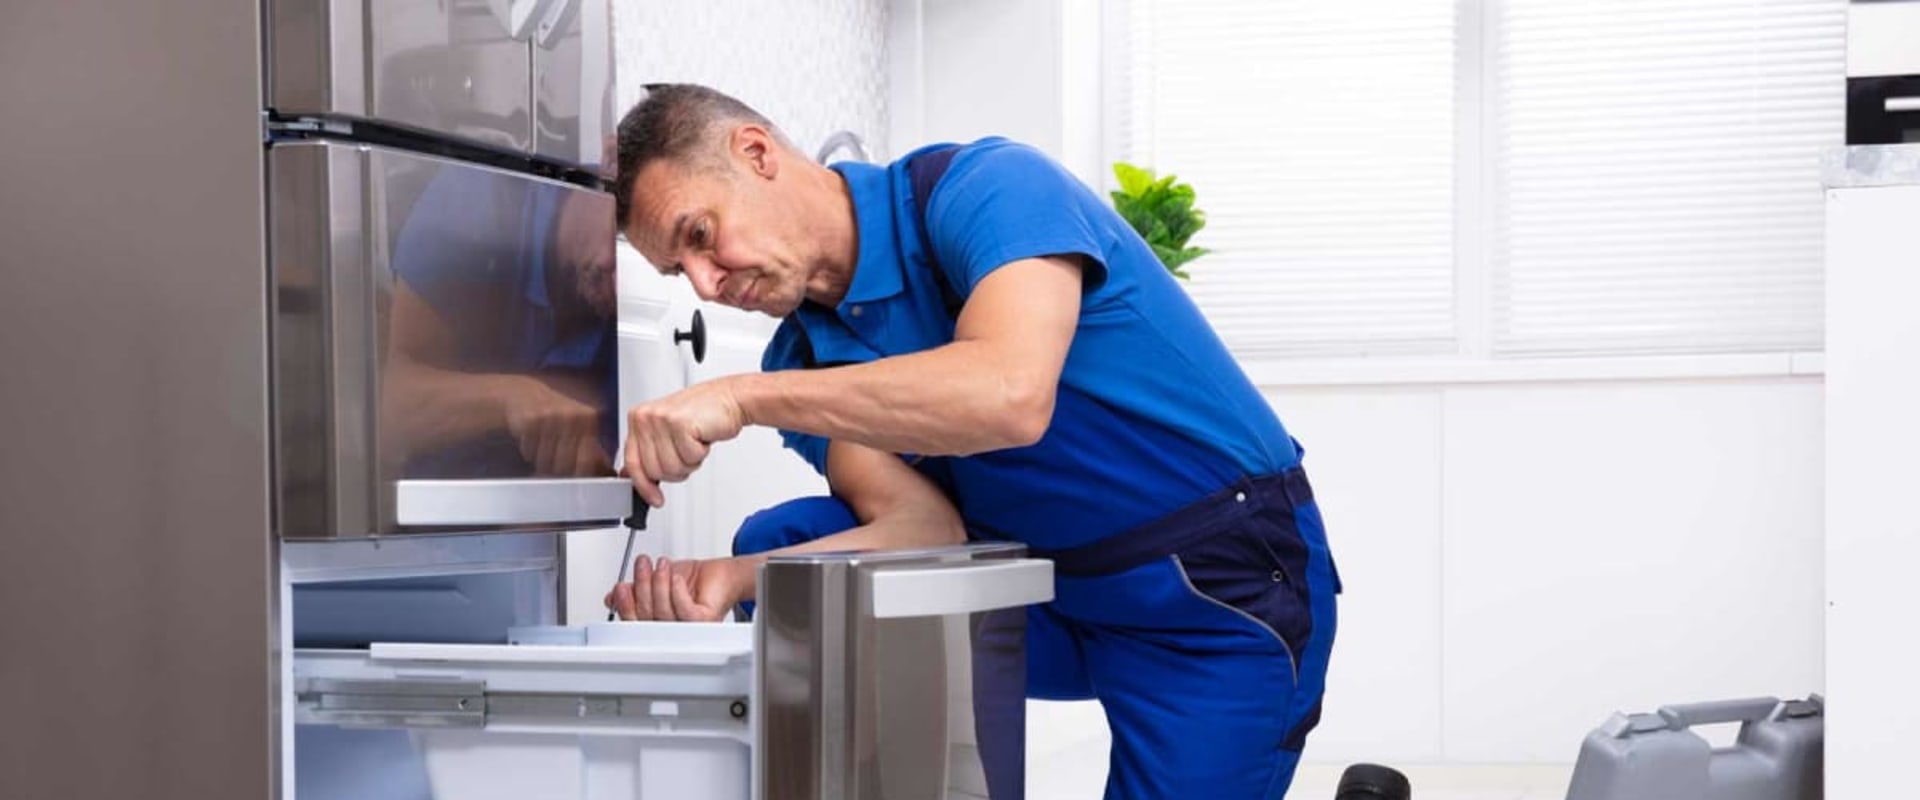 Repair or Replace: The Expert's Perspective on Refrigerator Maintenance